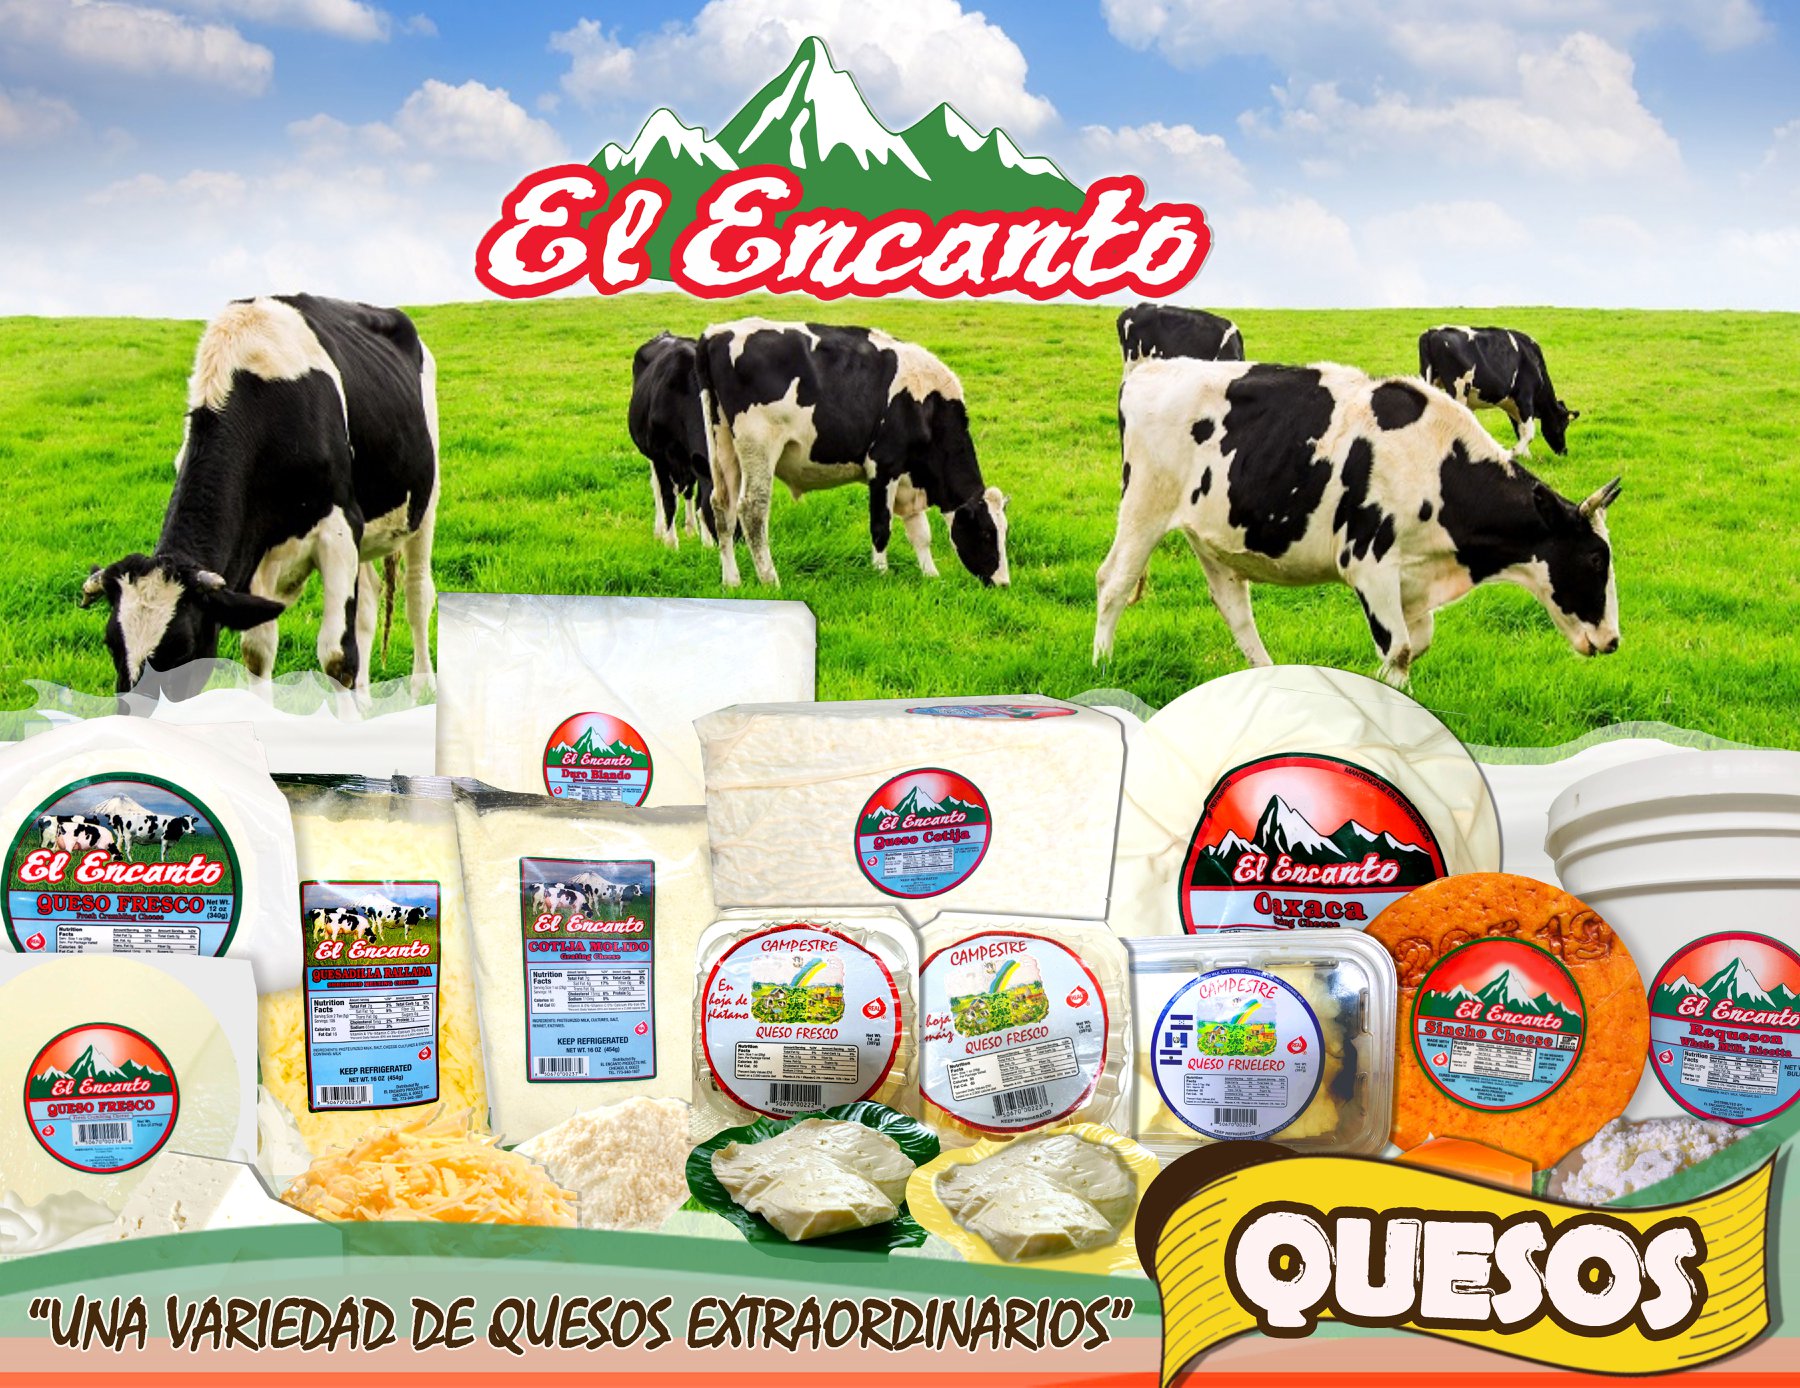 Wholesale Distributor of Mexican & Central American Products